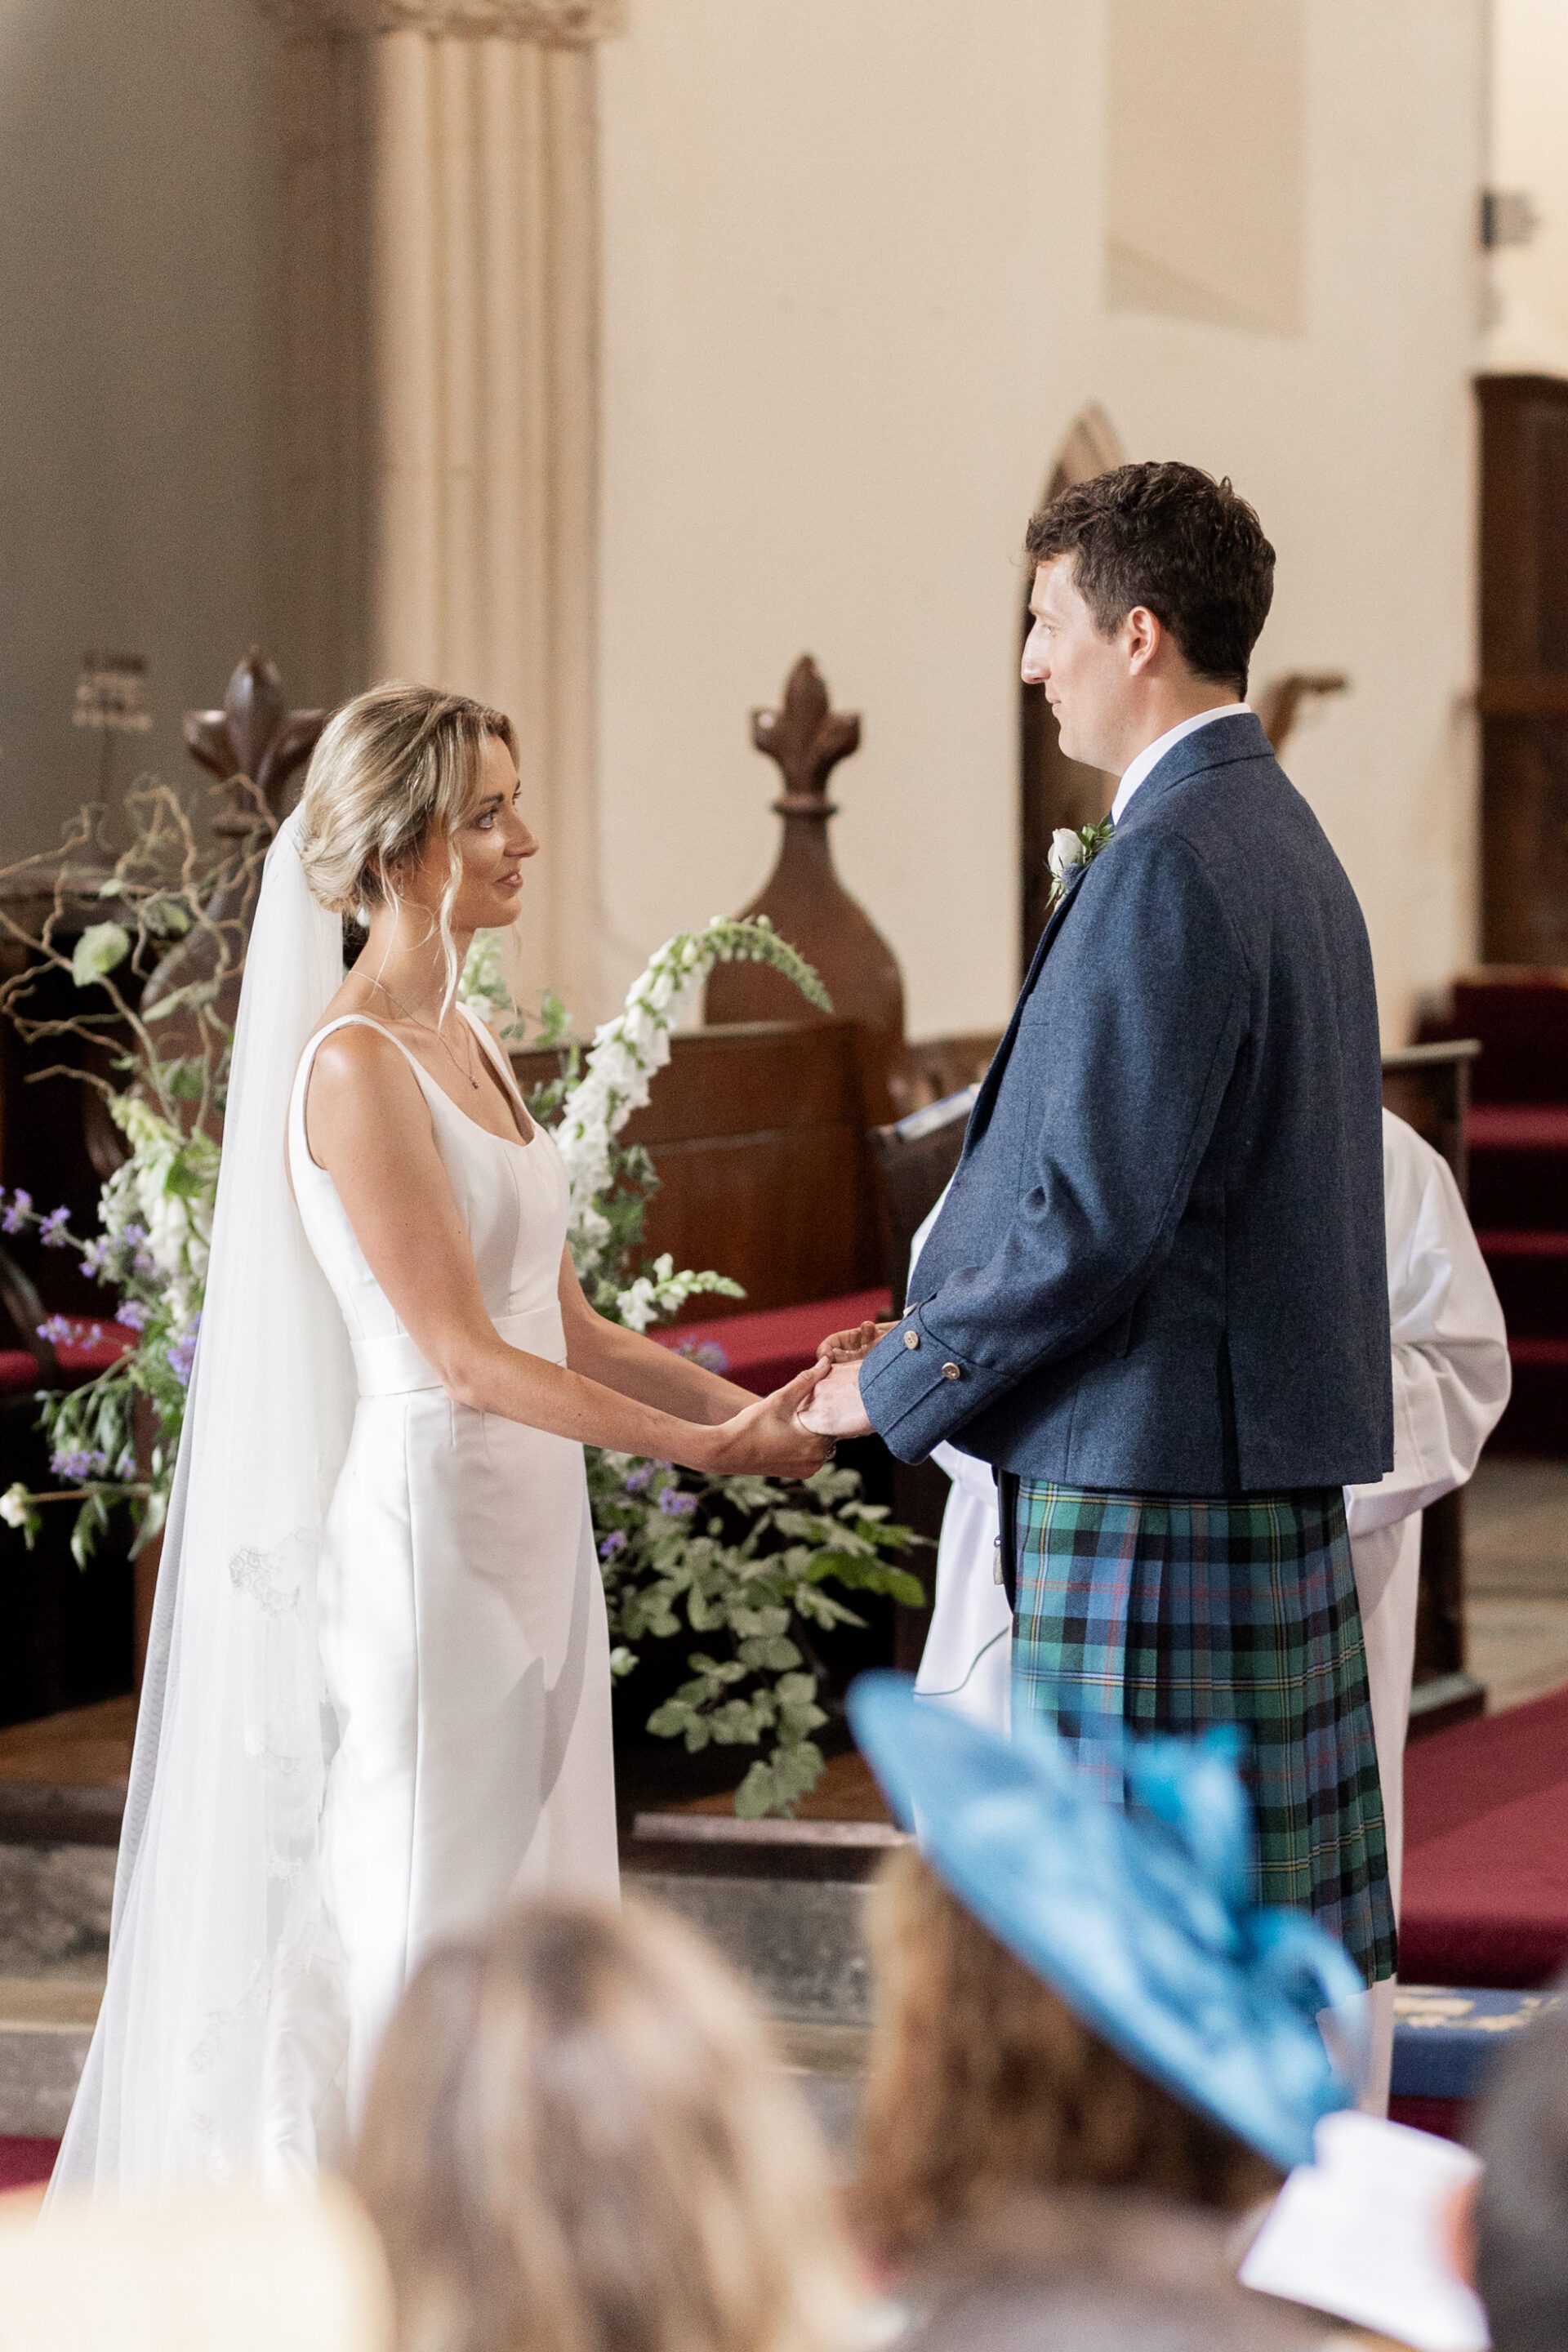 The bride and groom say their vows during their Devon church wedding ceremony